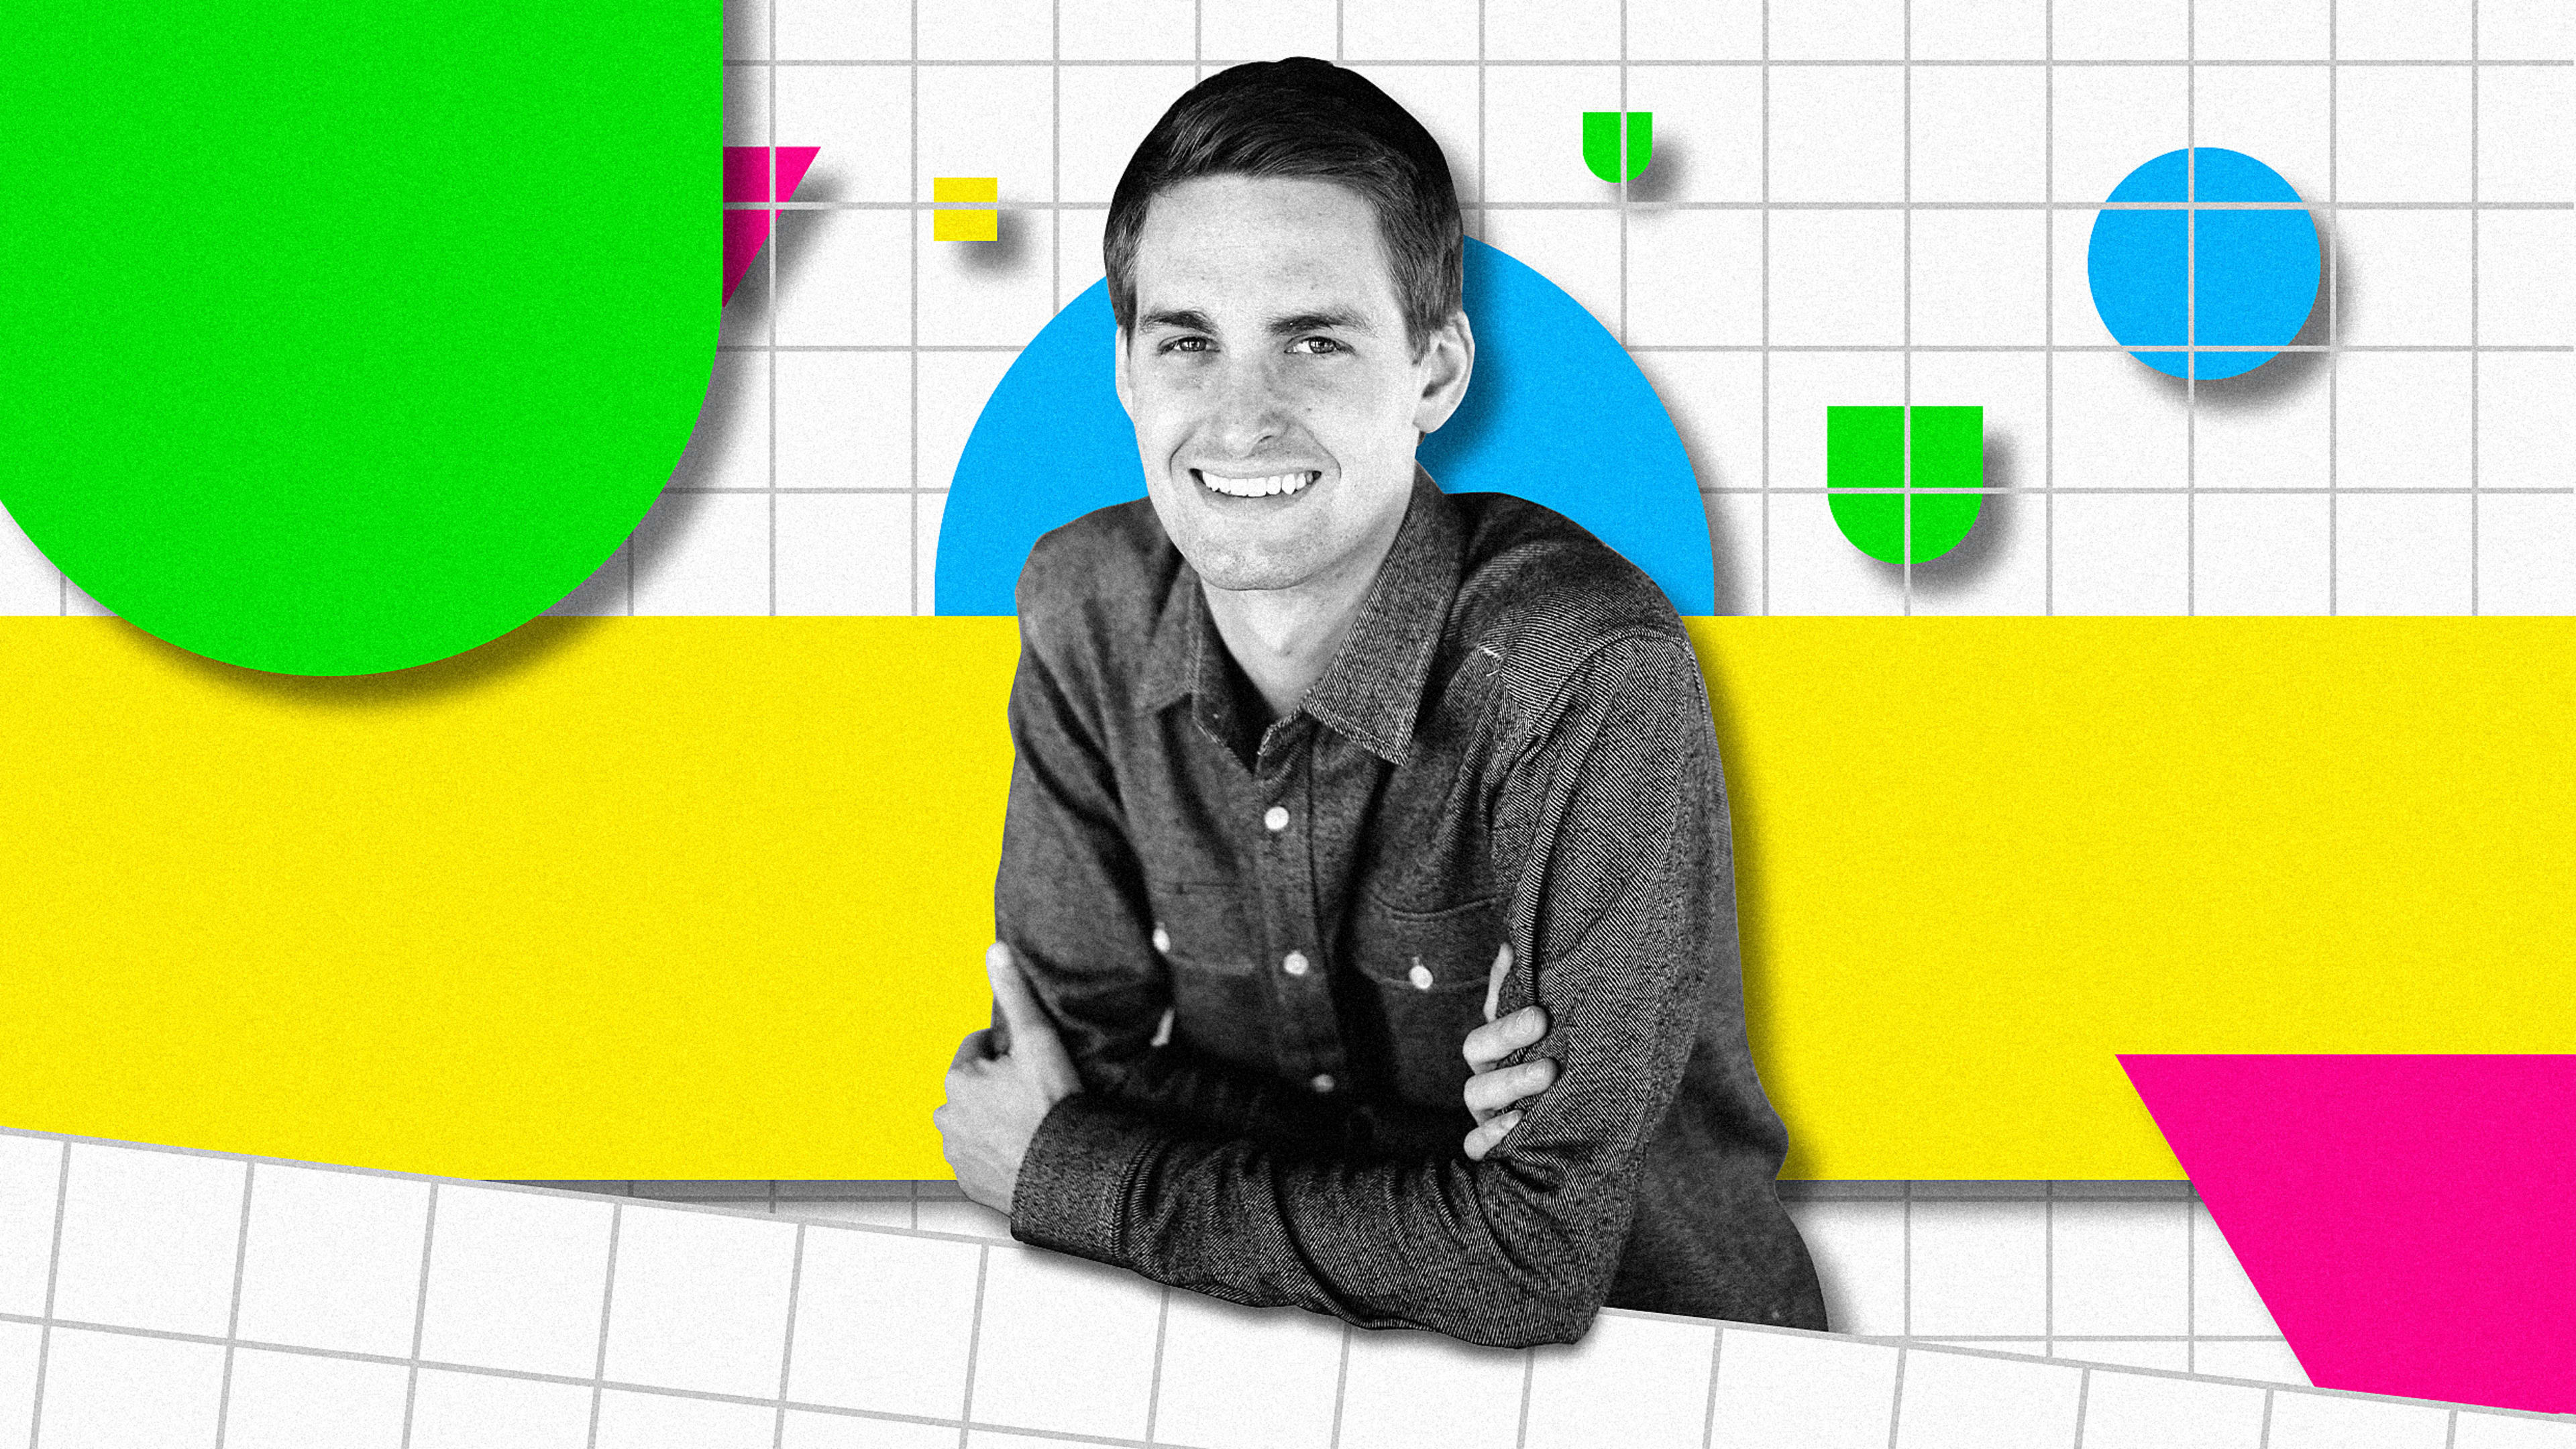 Evan Spiegel: Brands on Snapchat have been more willing to experiment with AR since COVID-19